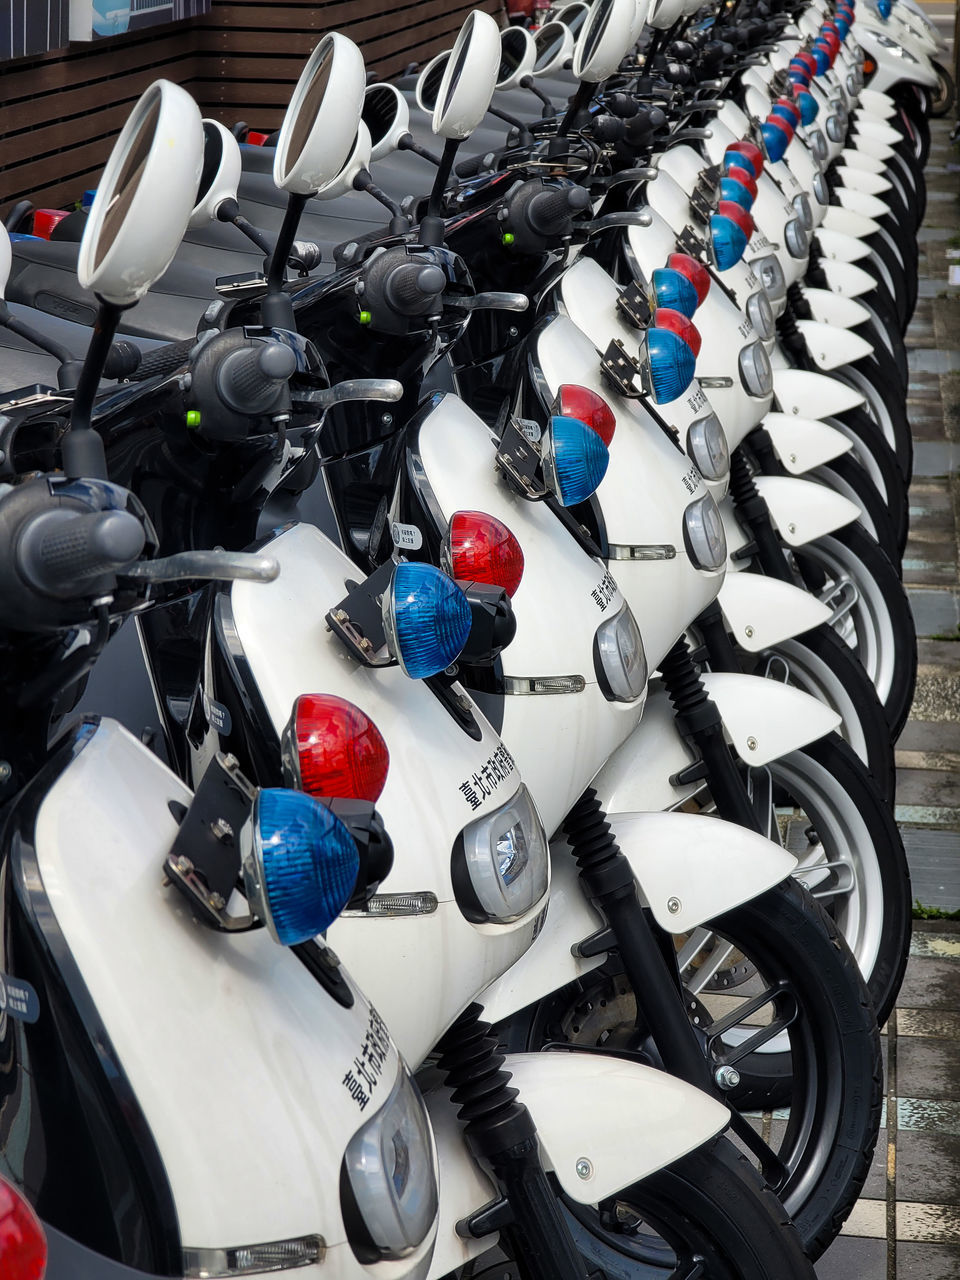 vehicle, car, motorcycle, land vehicle, transportation, motorcycling, mode of transportation, large group of objects, in a row, no people, sports